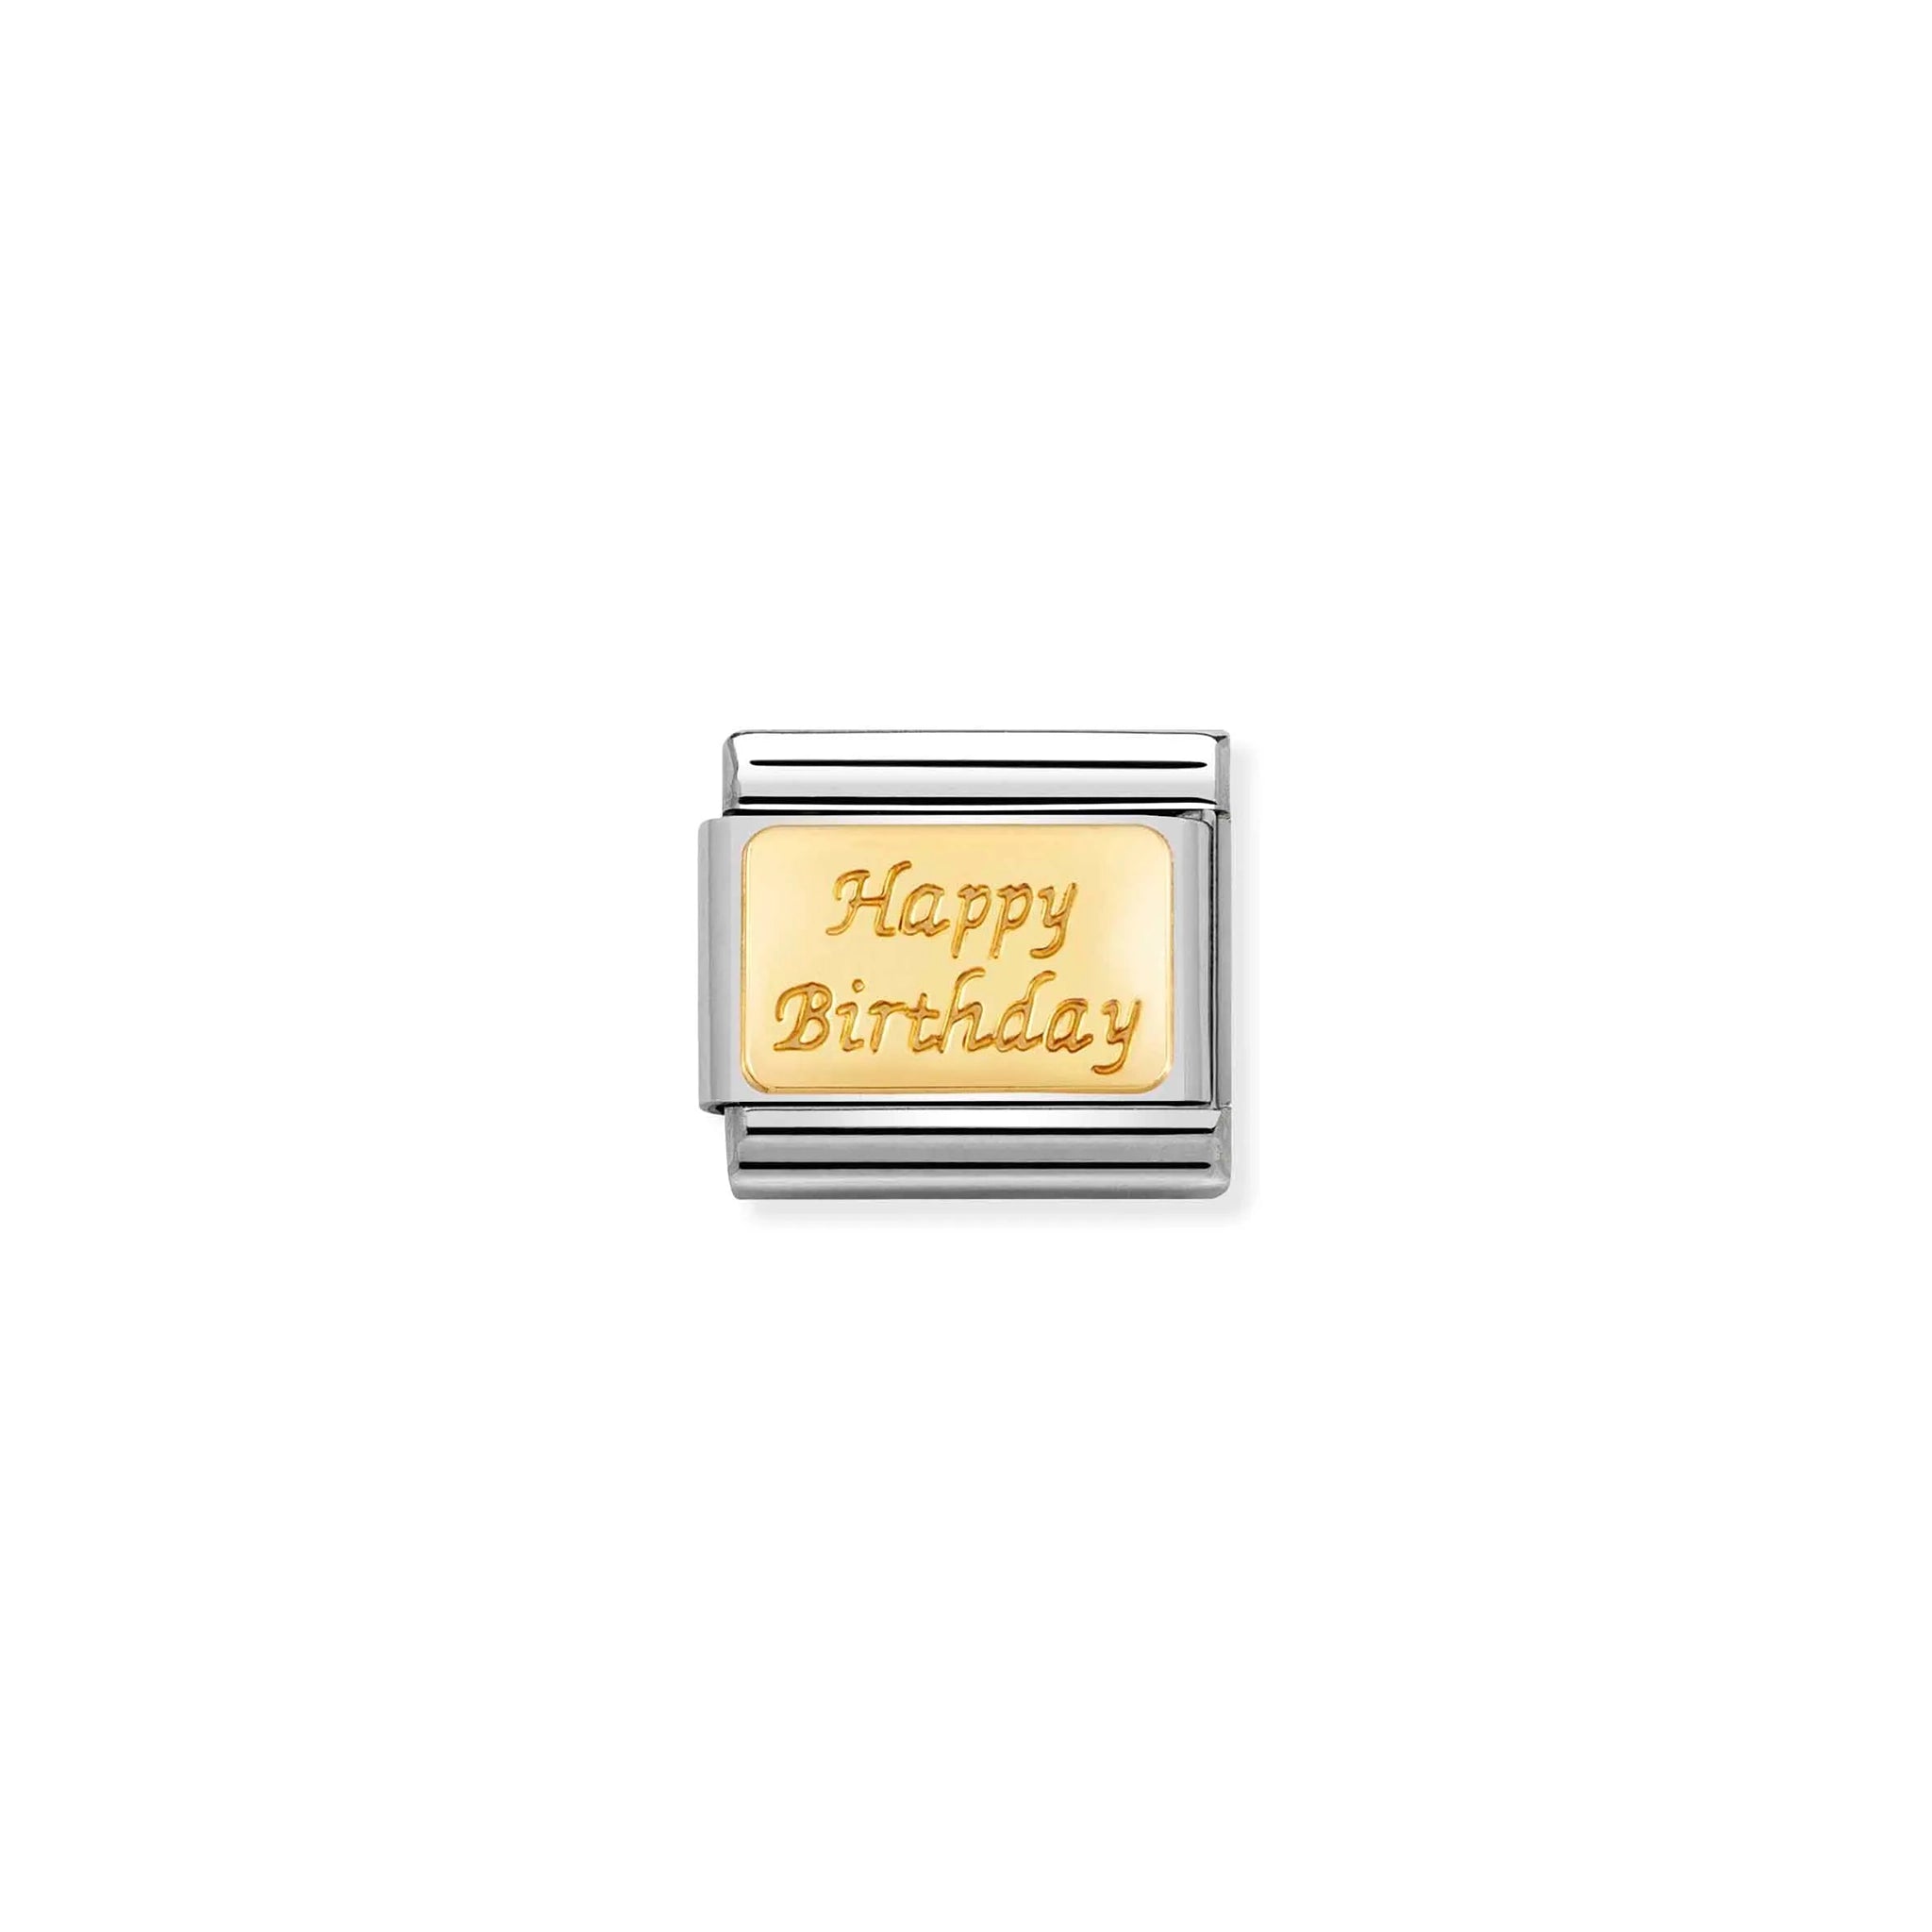 A Nomination charm link featuring a plain gold plaque engraved with the words 'Happy Birthday;